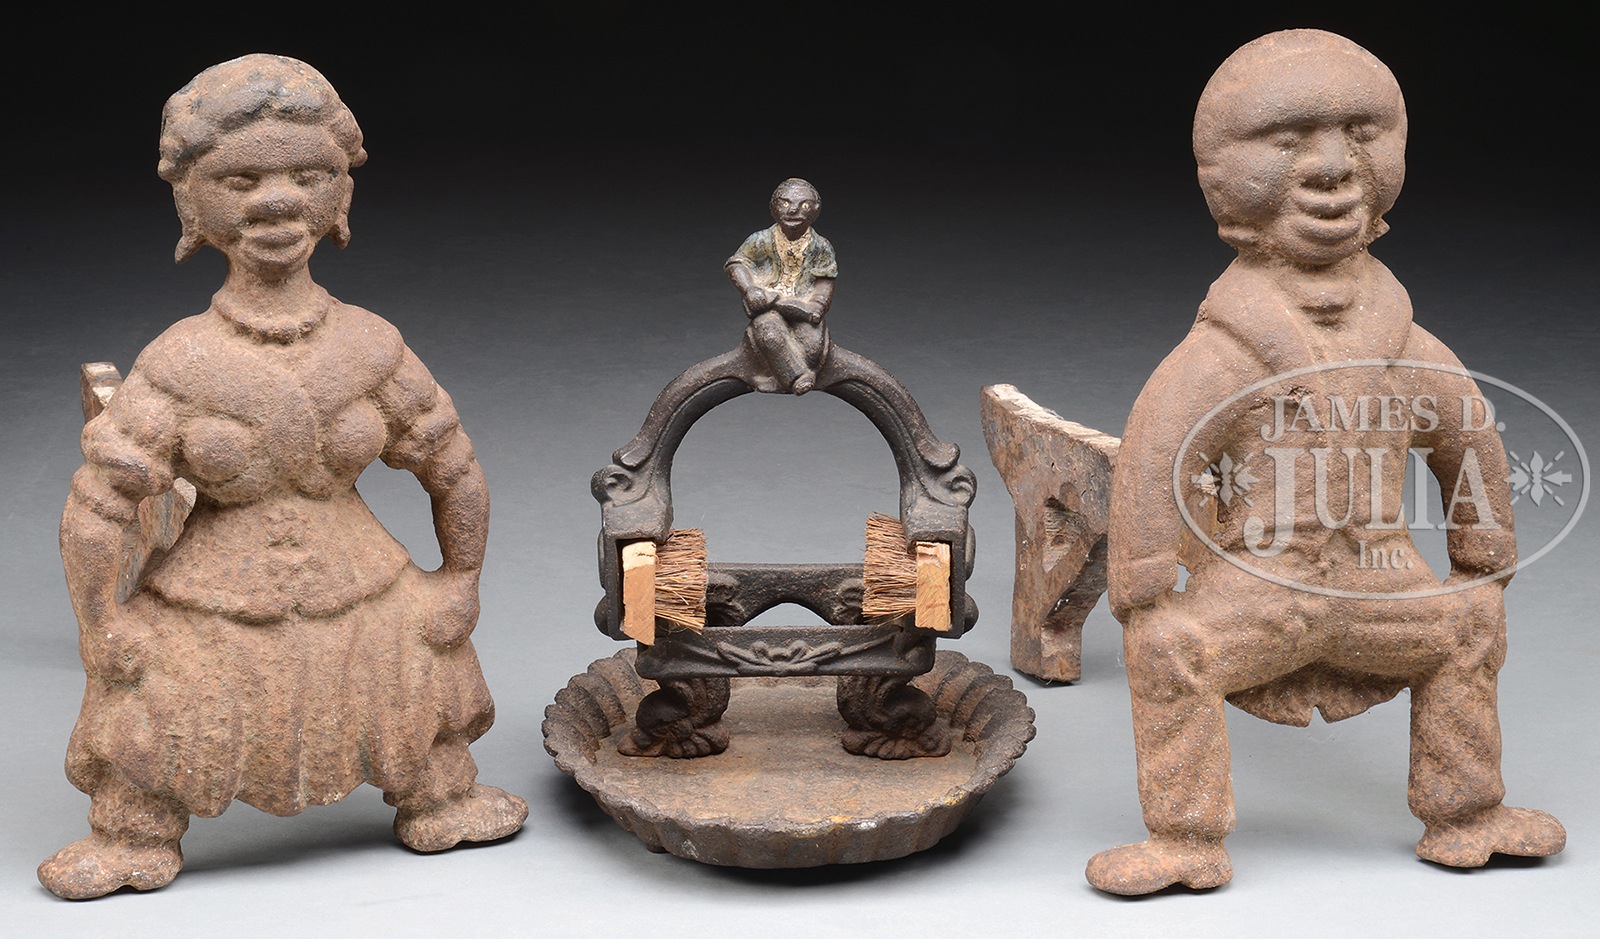 PAIR OF FIGURAL ANDIRONS AND BOOTSCRAPER. The andirons in the form of a black couple with hands on